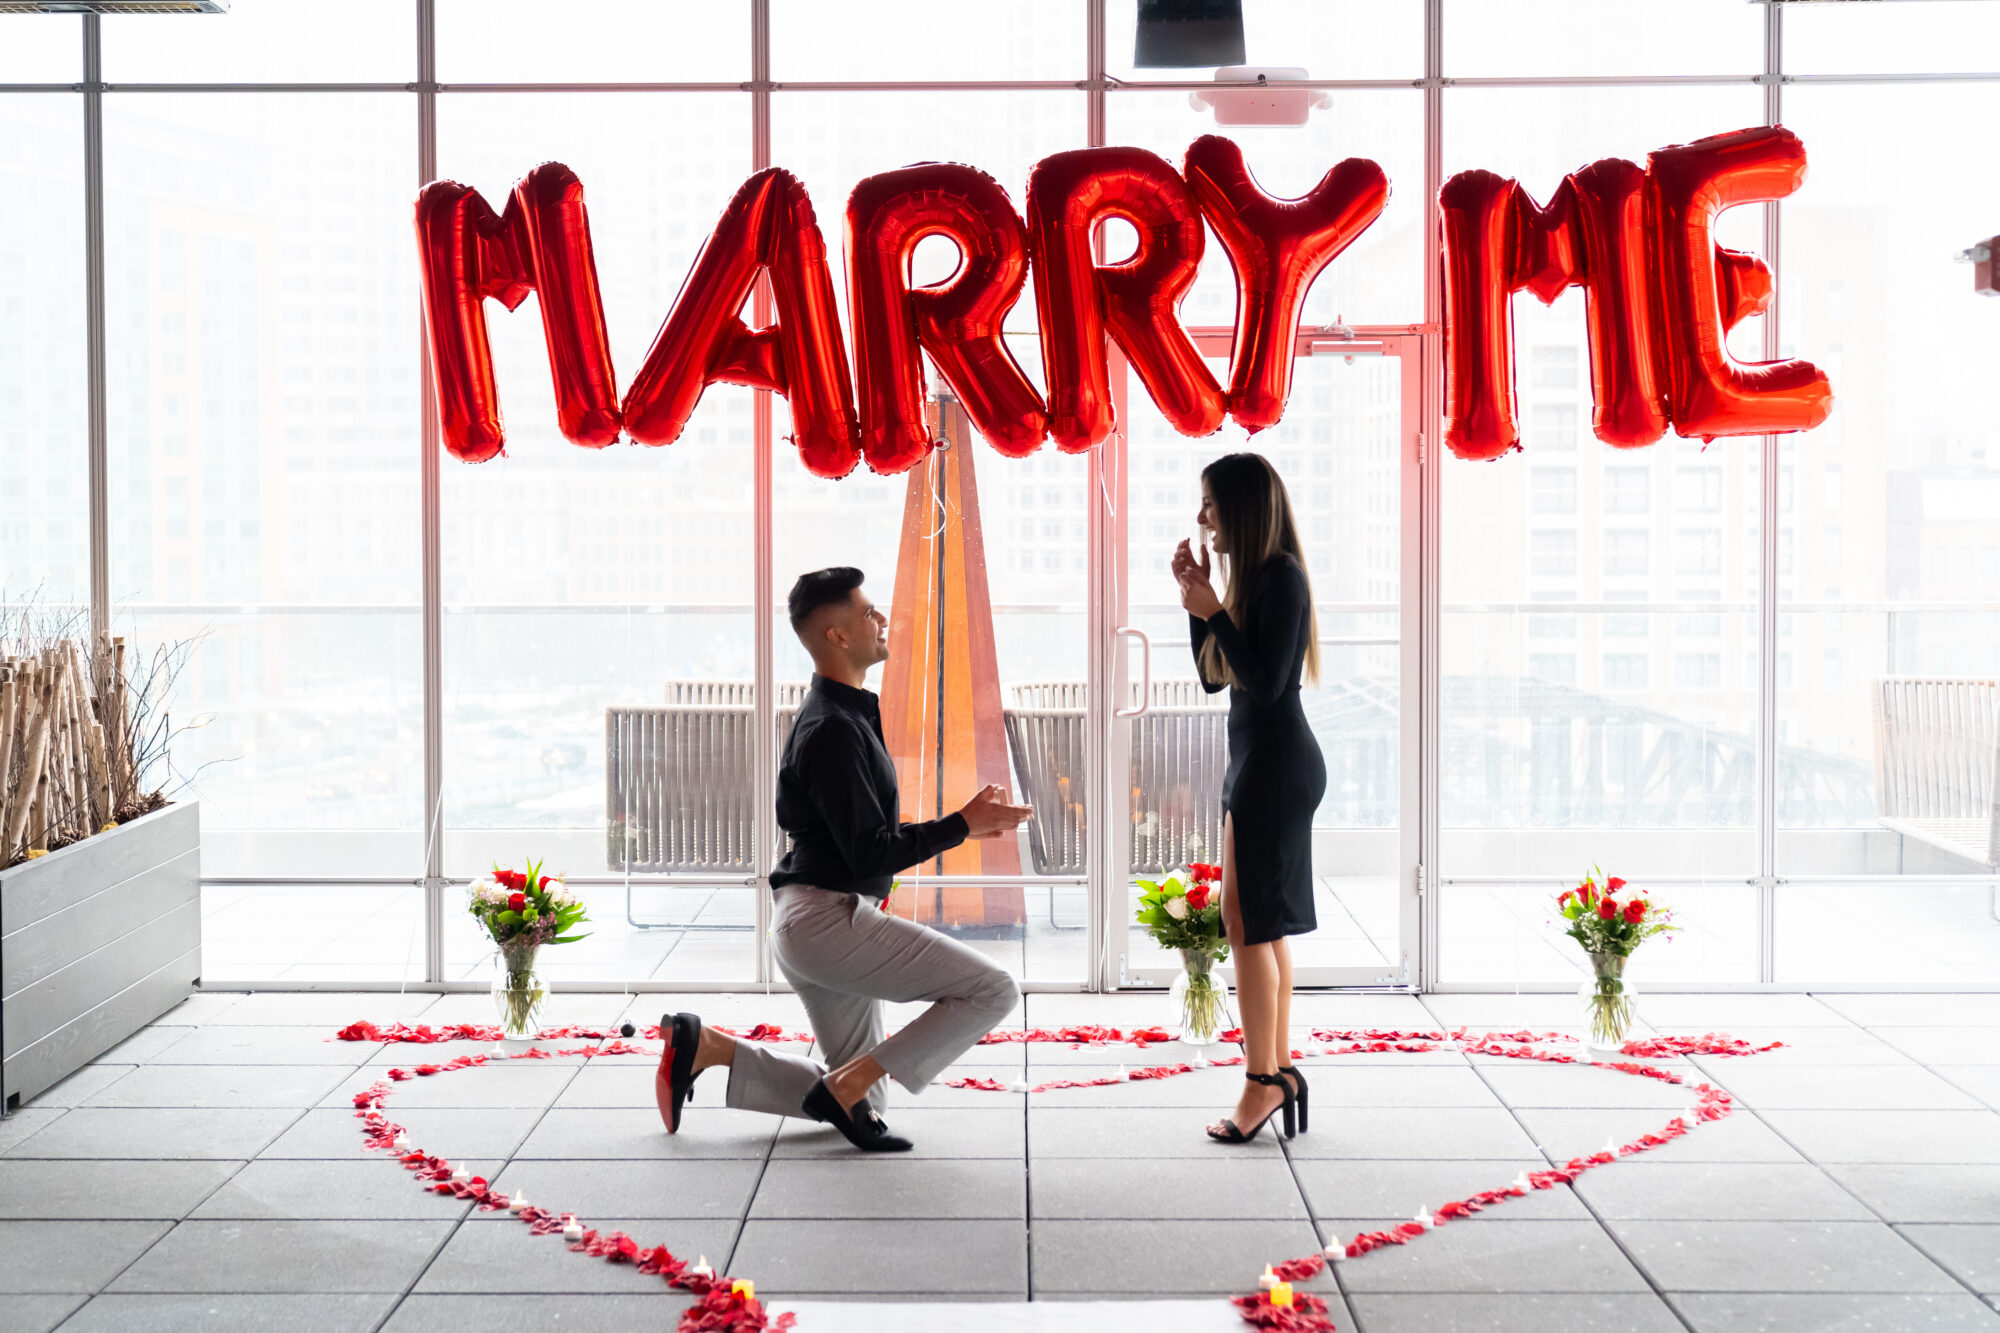 A Boston proposal photographer captures an intimate moment as a man and woman kneel in front of a "marry me" balloon.